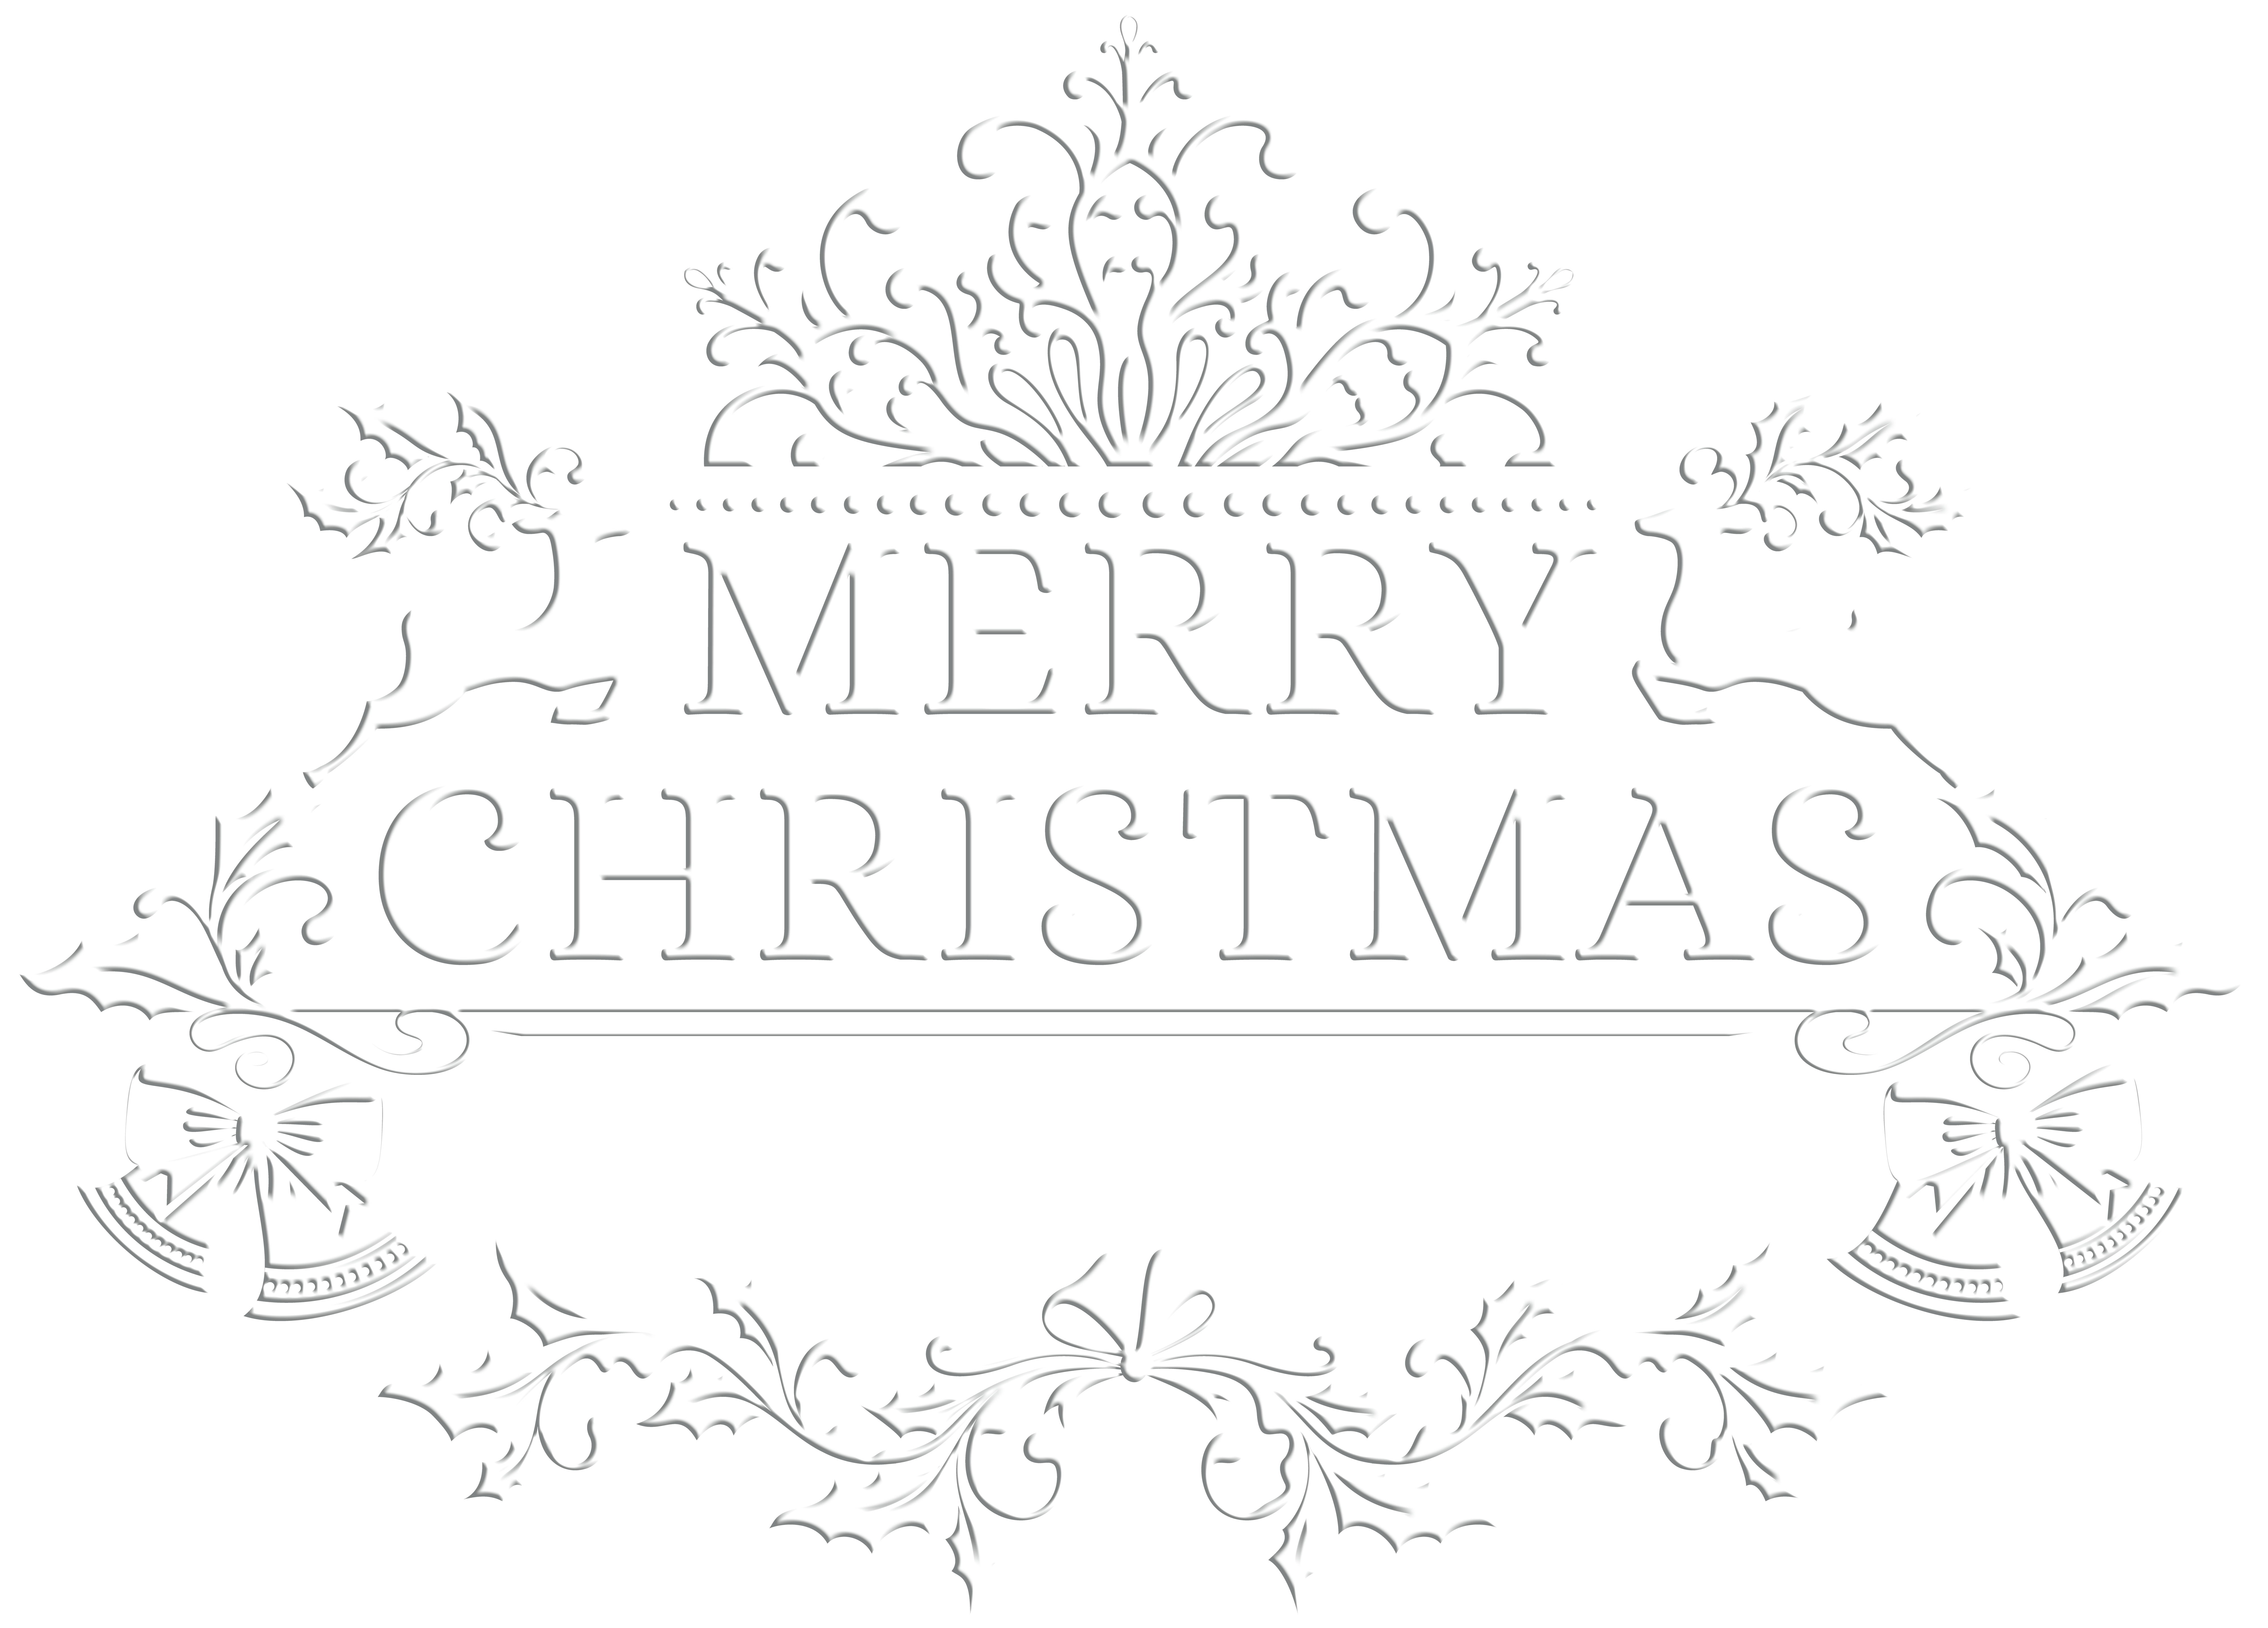 black and white merry christmas clip art